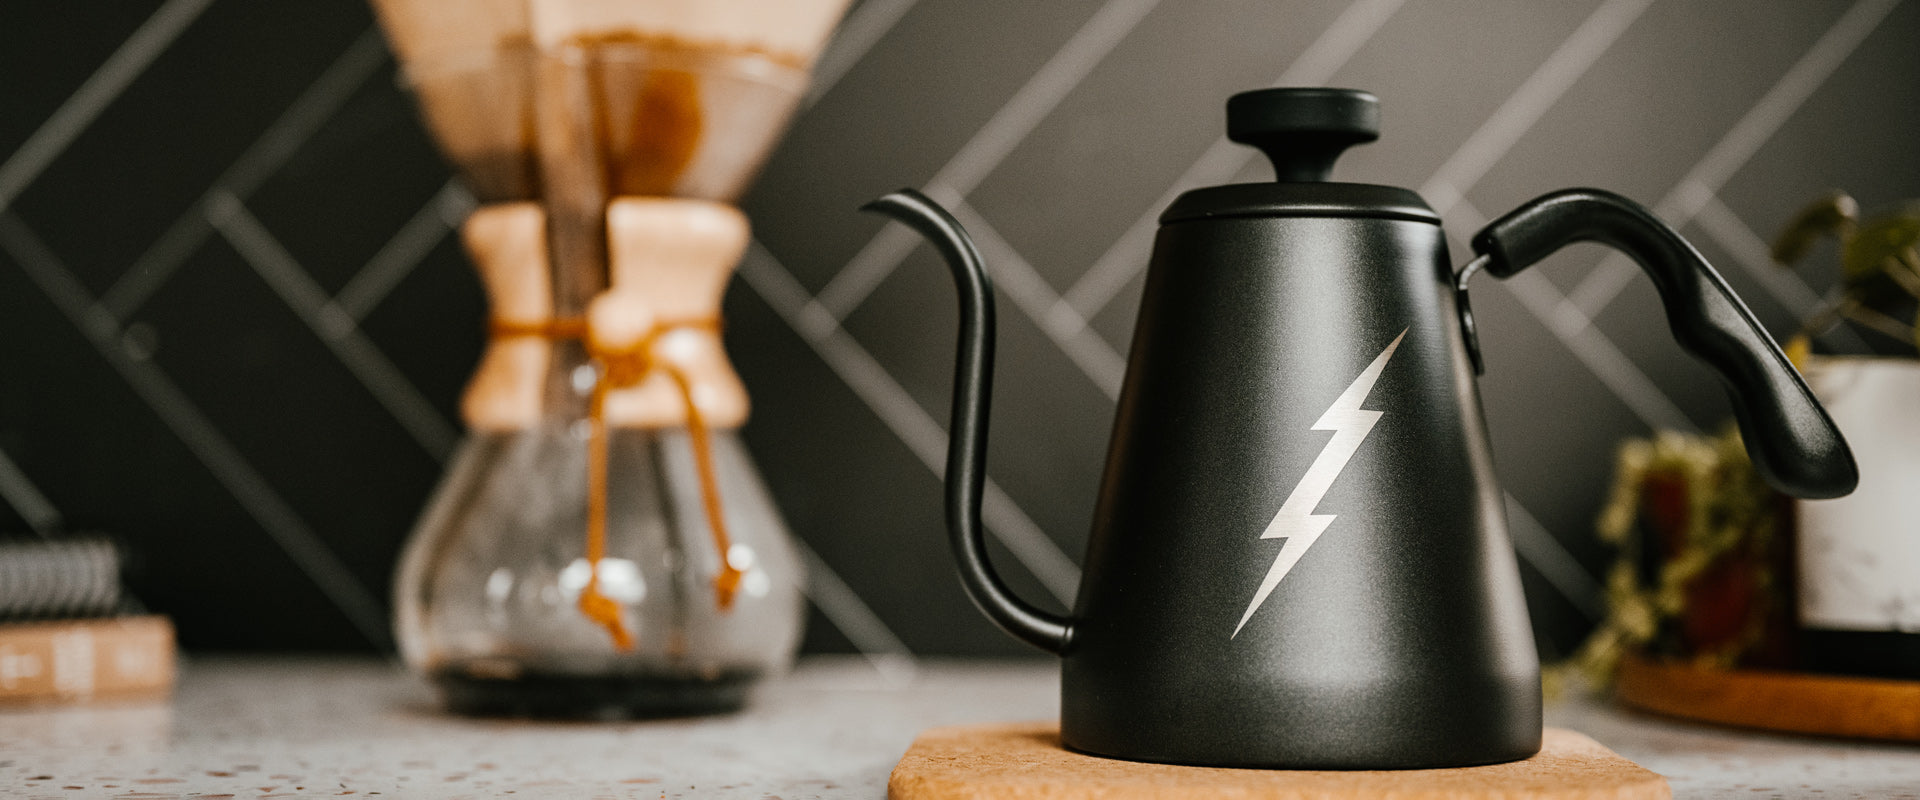 Shop brewing methods and save 20% off this weekend only.